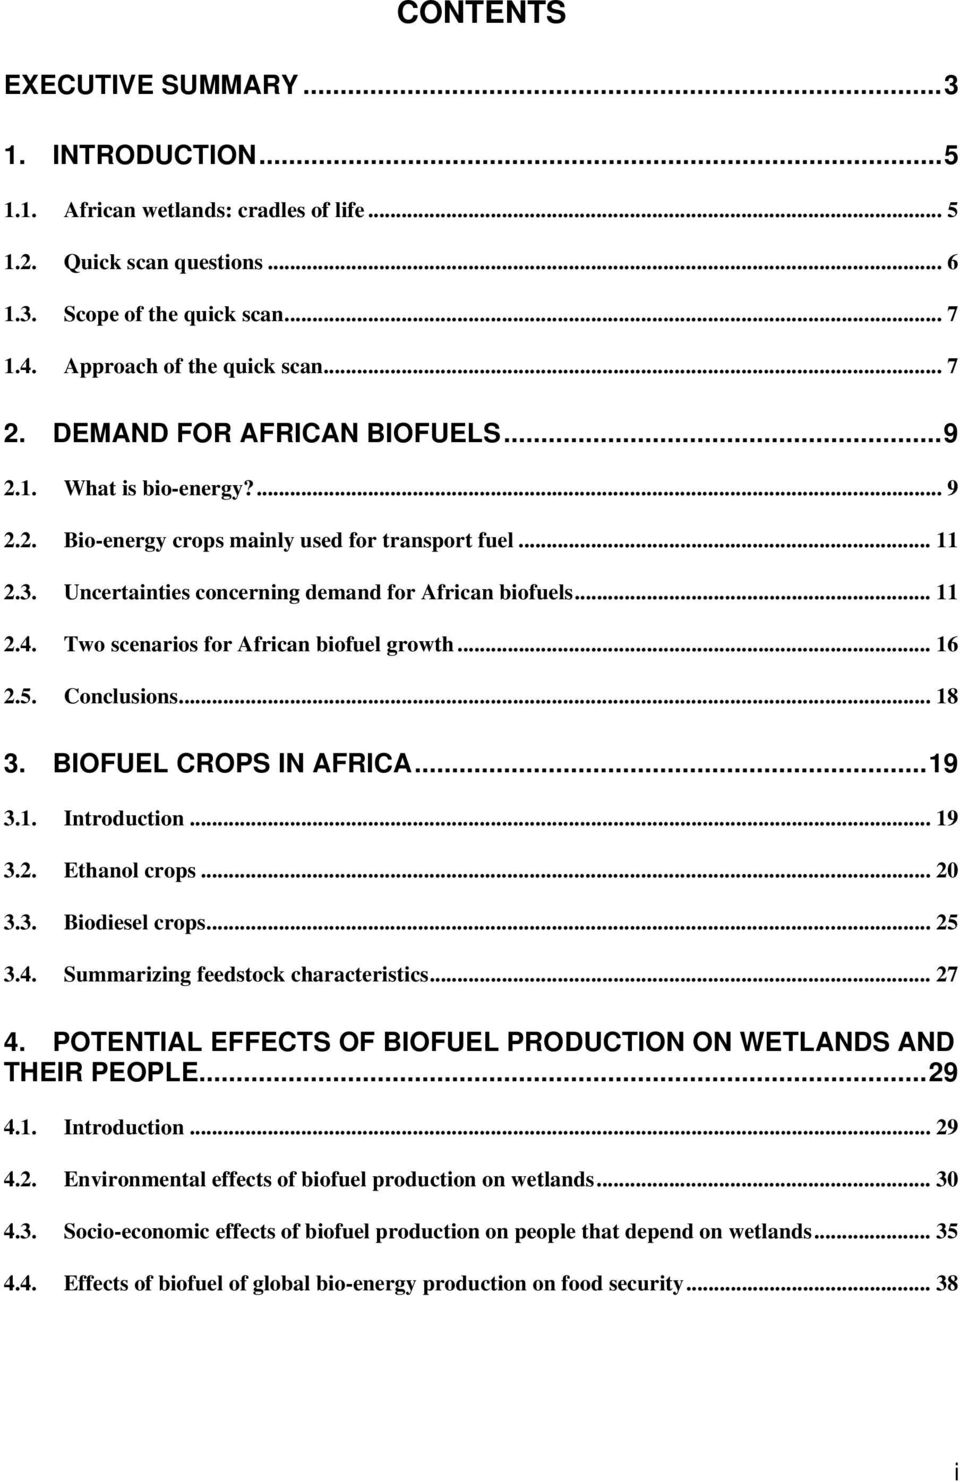 Two scenarios for African biofuel growth... 16 2.5. Conclusions... 18 3. BIOFUEL CROPS IN AFRICA...19 3.1. Introduction... 19 3.2. Ethanol crops... 20 3.3. Biodiesel crops... 25 3.4.